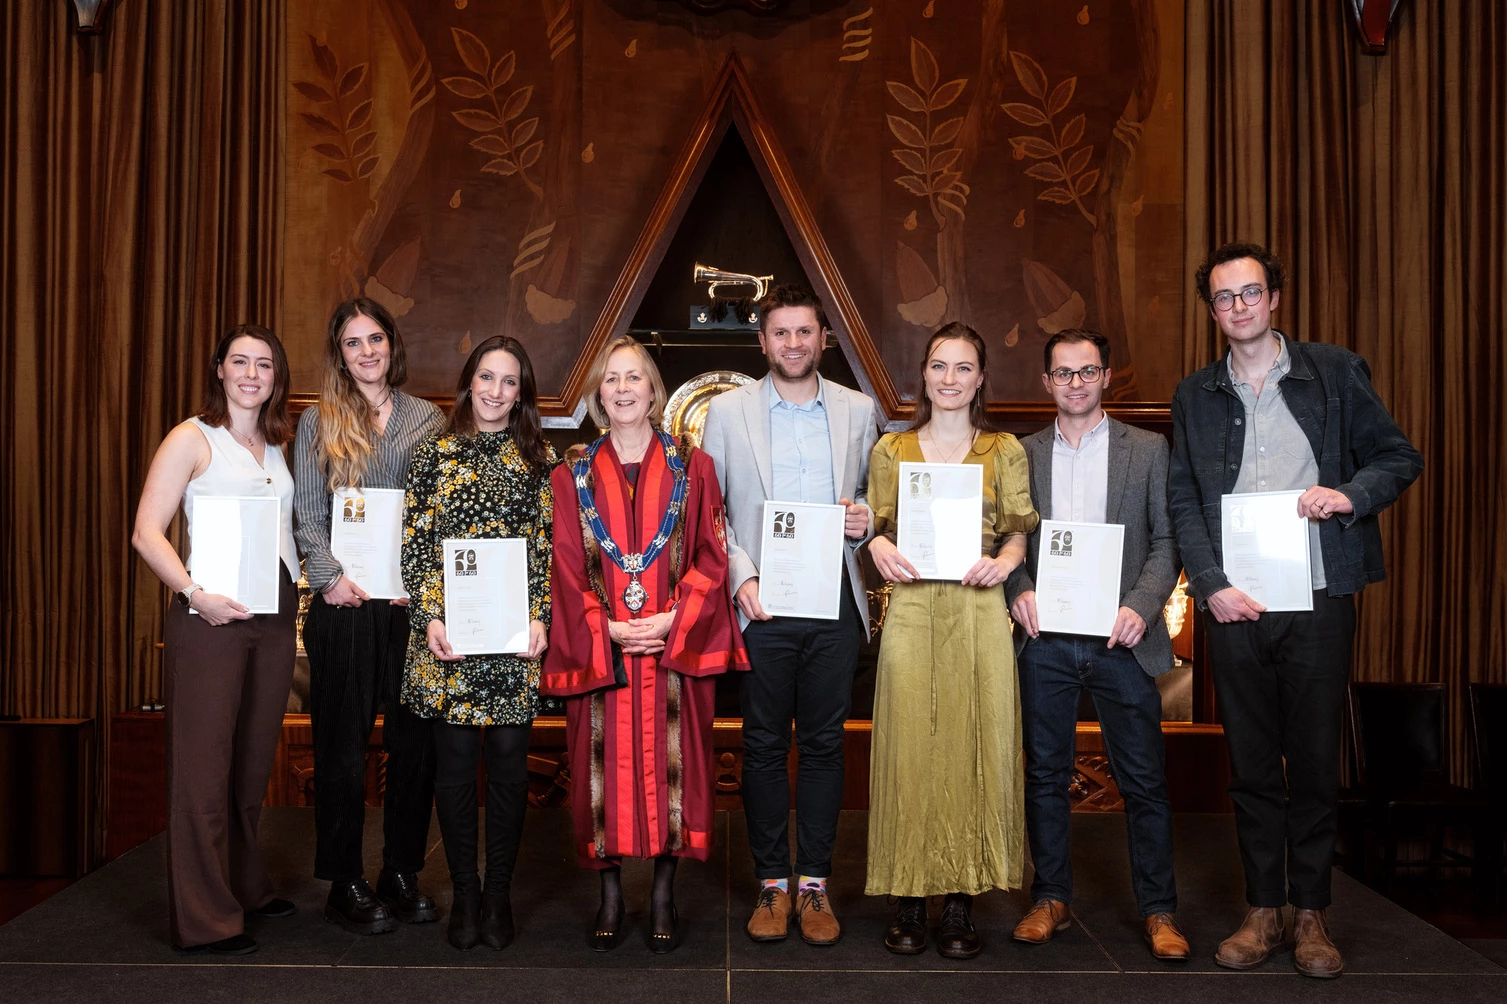 Amanda Waring, Master of the Furniture Makers’ Company, with some of the winners of the Furniture Makers’ Company’s ‘60 for 60’ in the South West